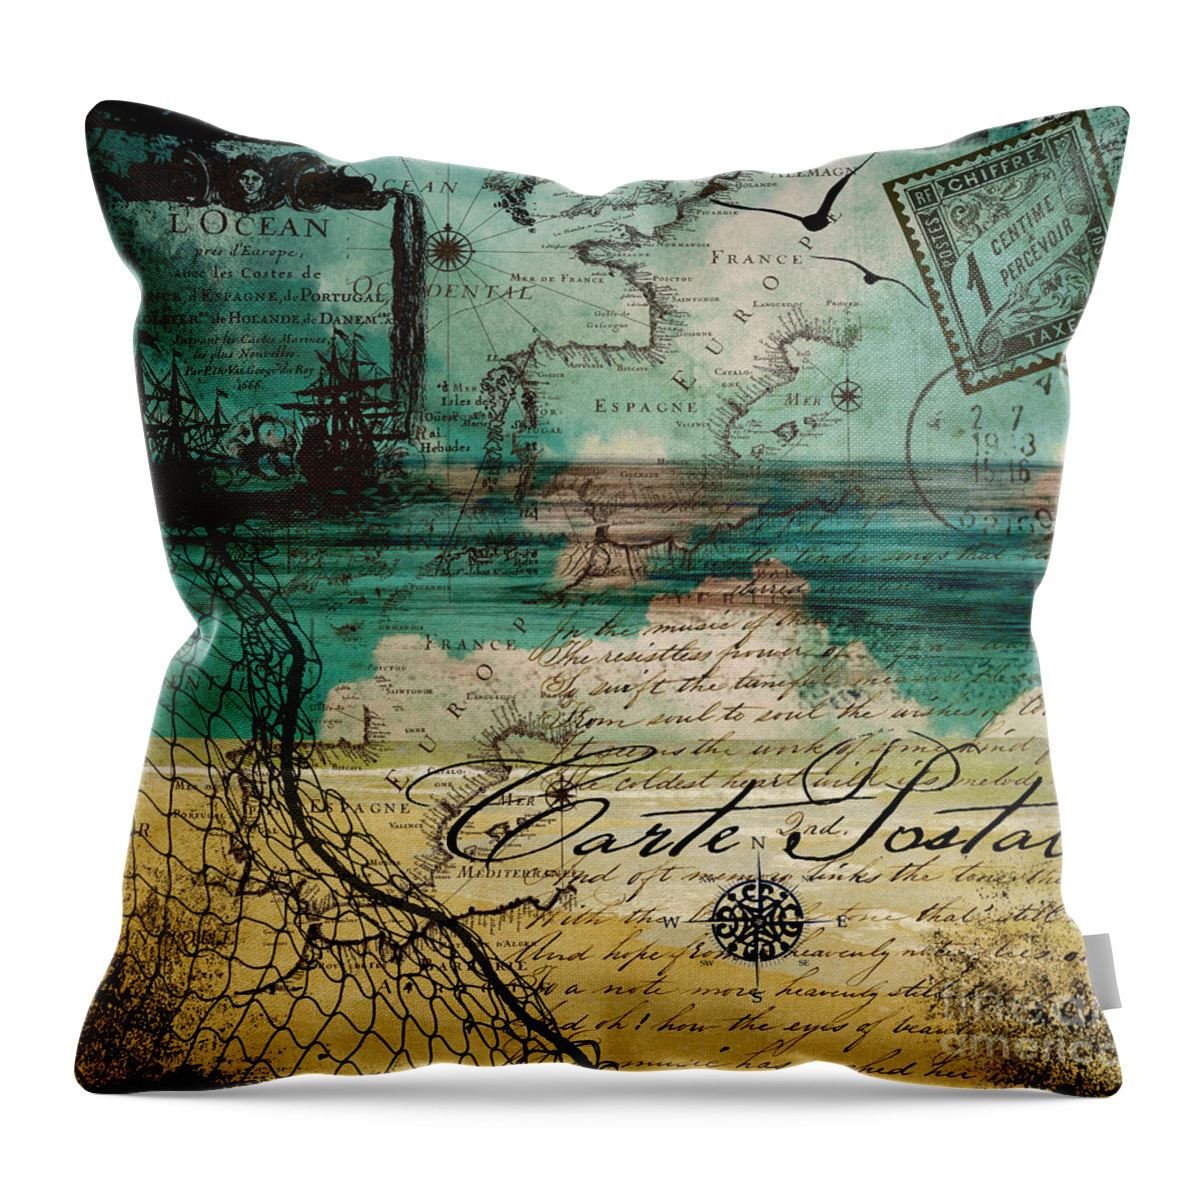 Ocean Throw Pillow featuring the painting Ocean Clouds by Mindy Sommers